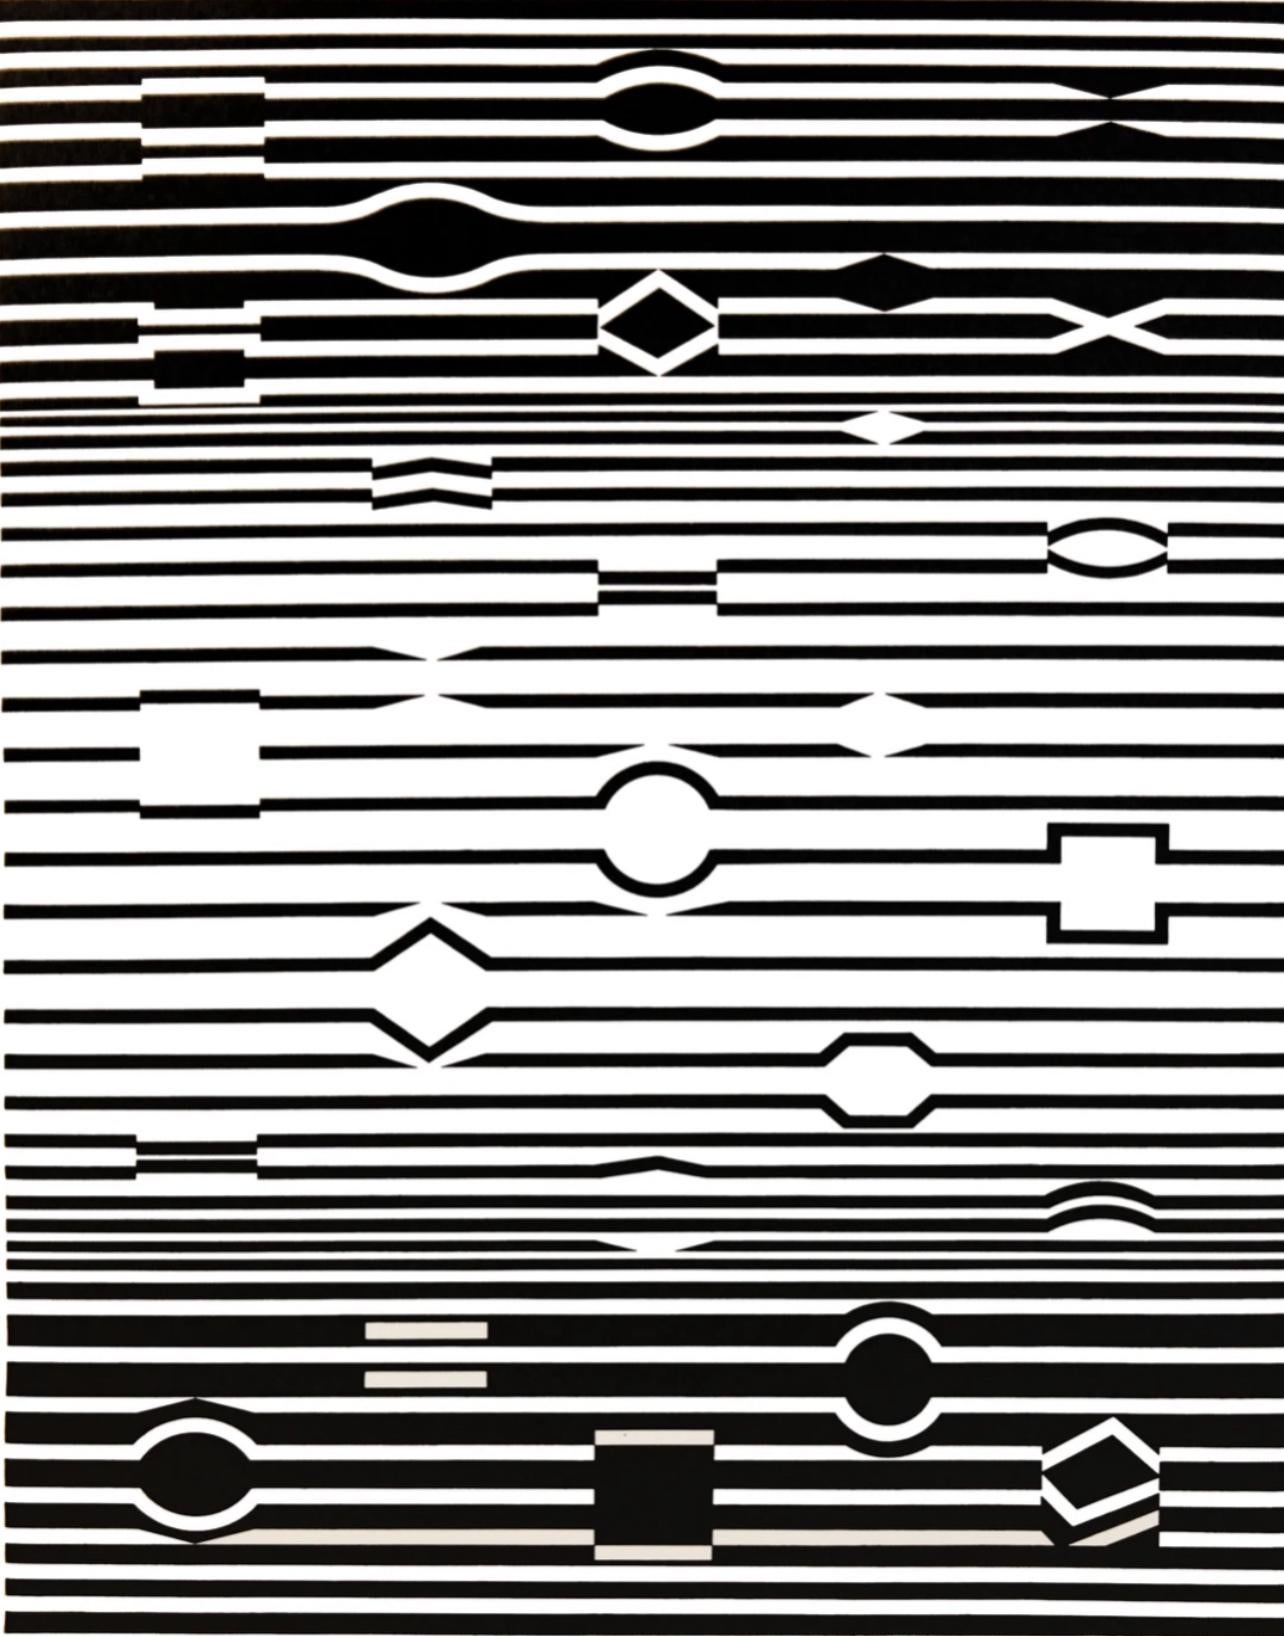 Victor Vasarely Abstract Print - Vasarely, Composition, Ondulatoires (after)